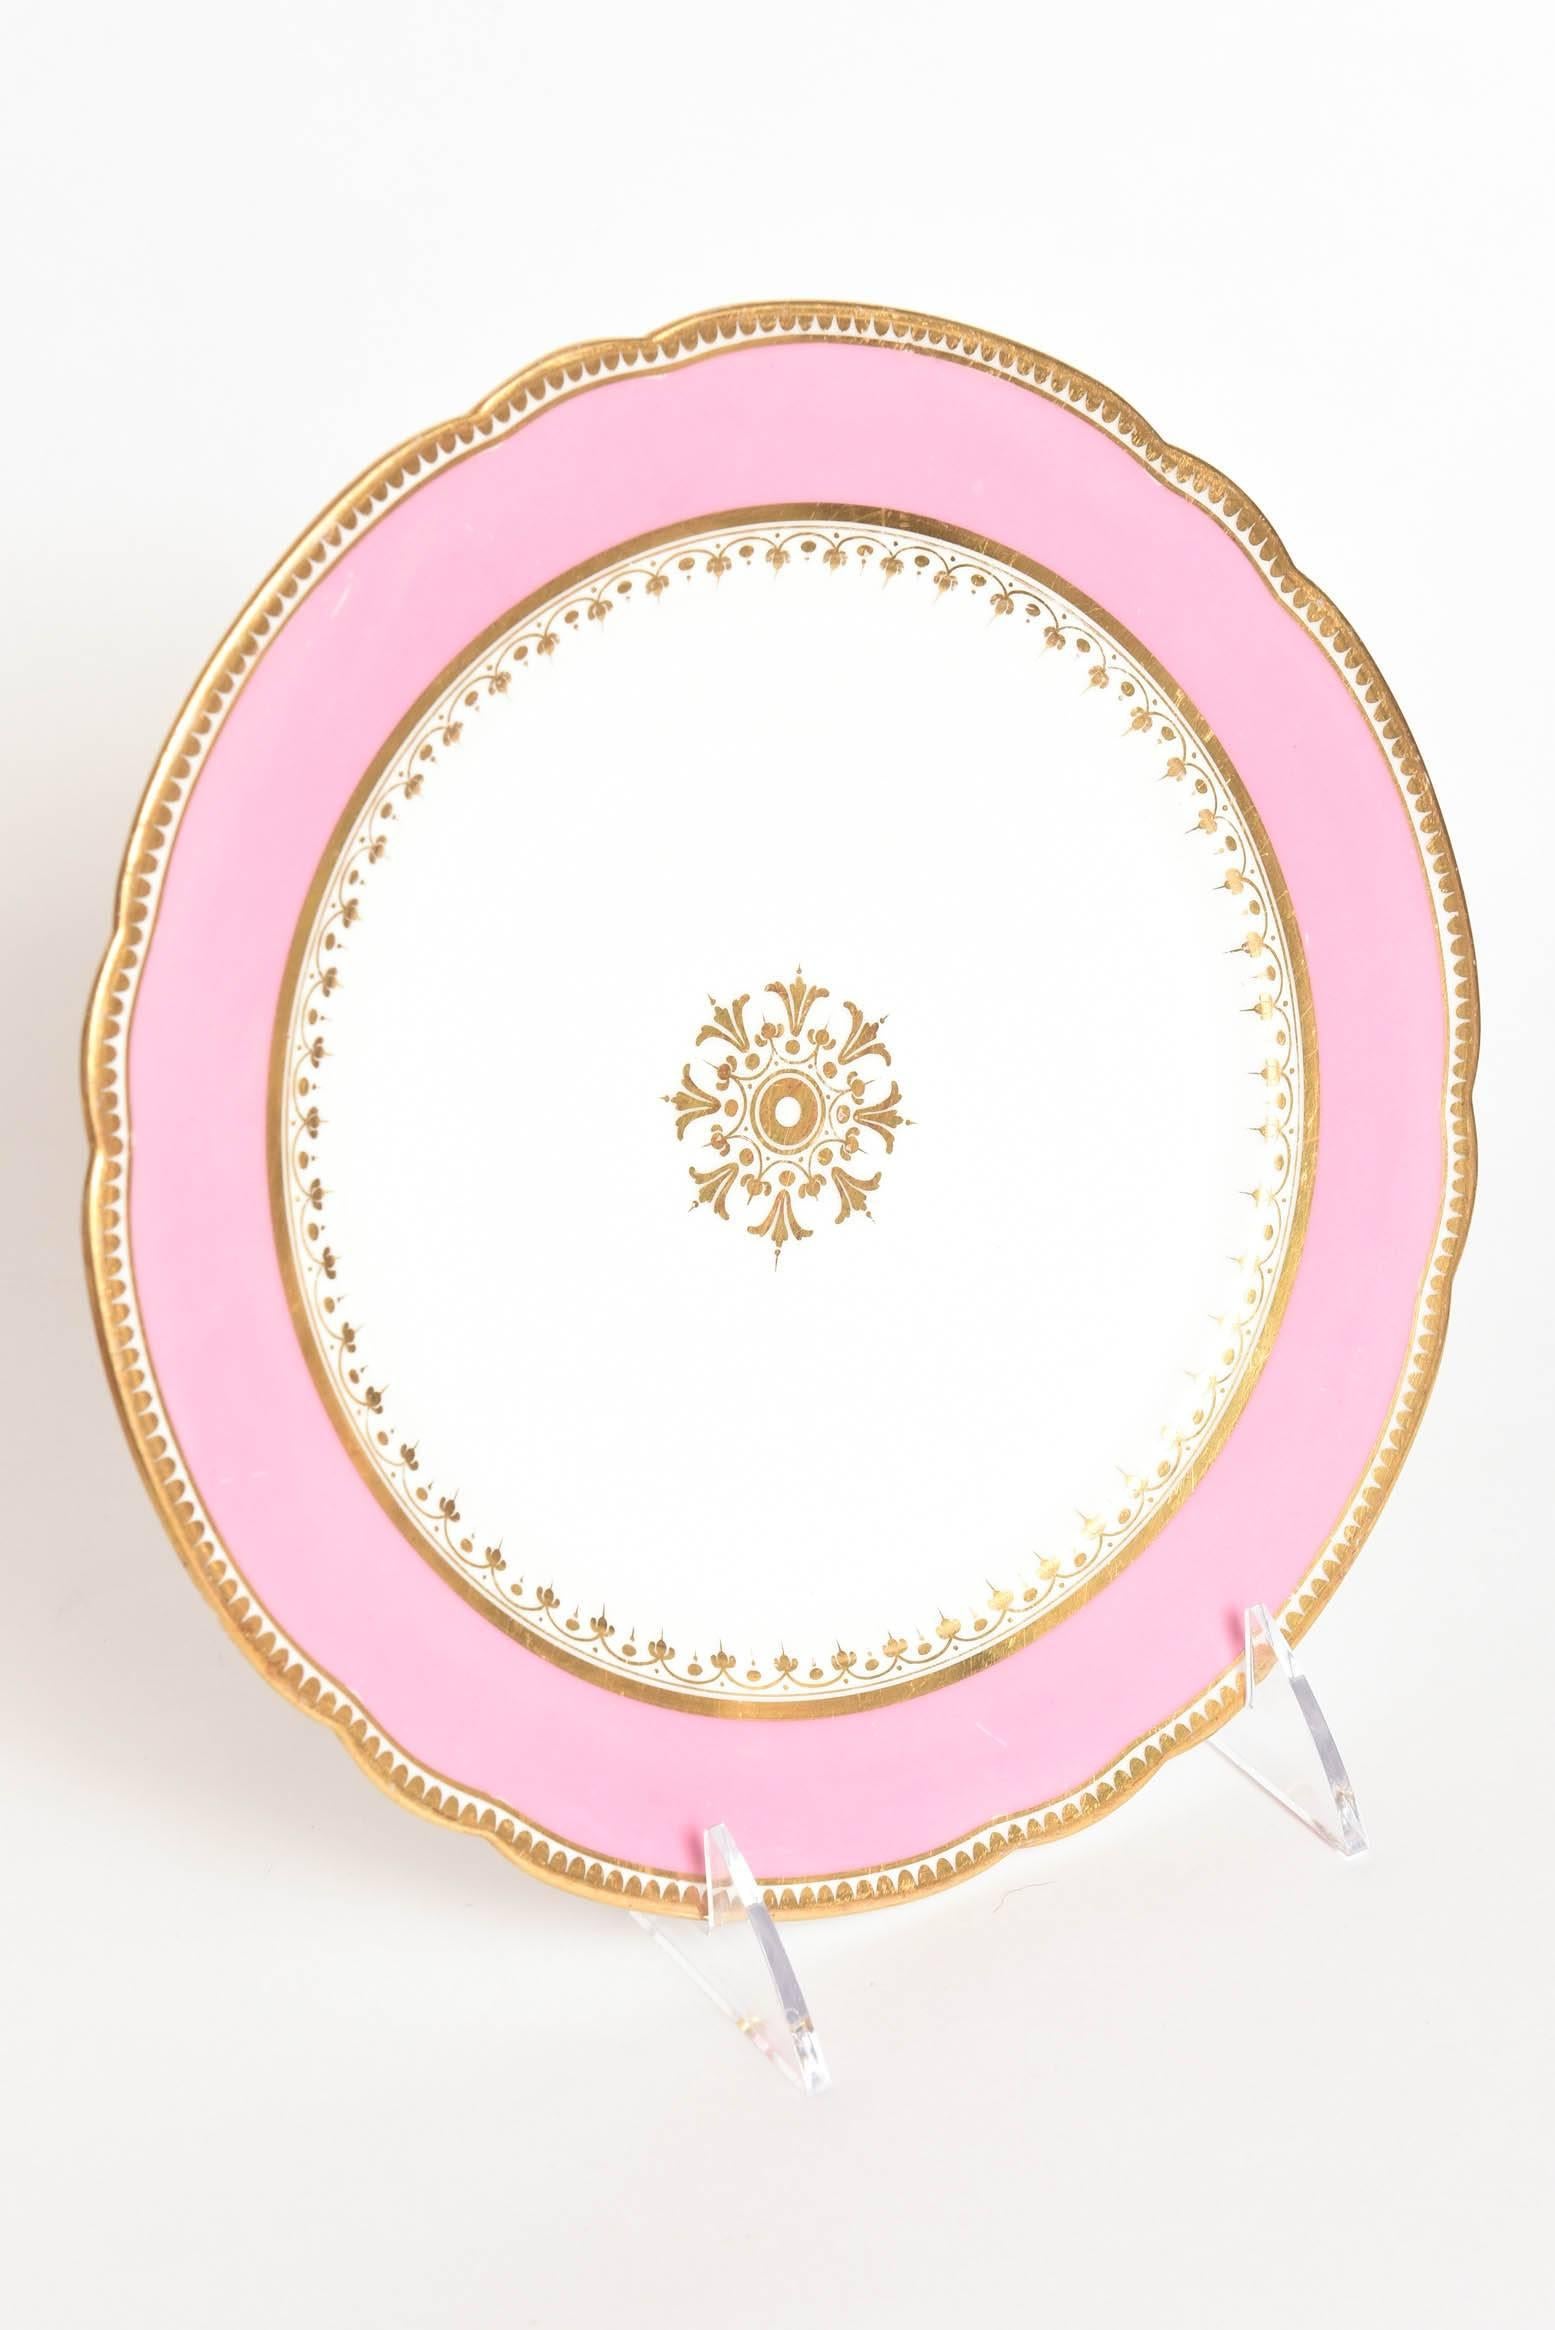 Hand-Crafted 12 Antique Pink and Gold Dessert Plates, Gilt Centre Medallion